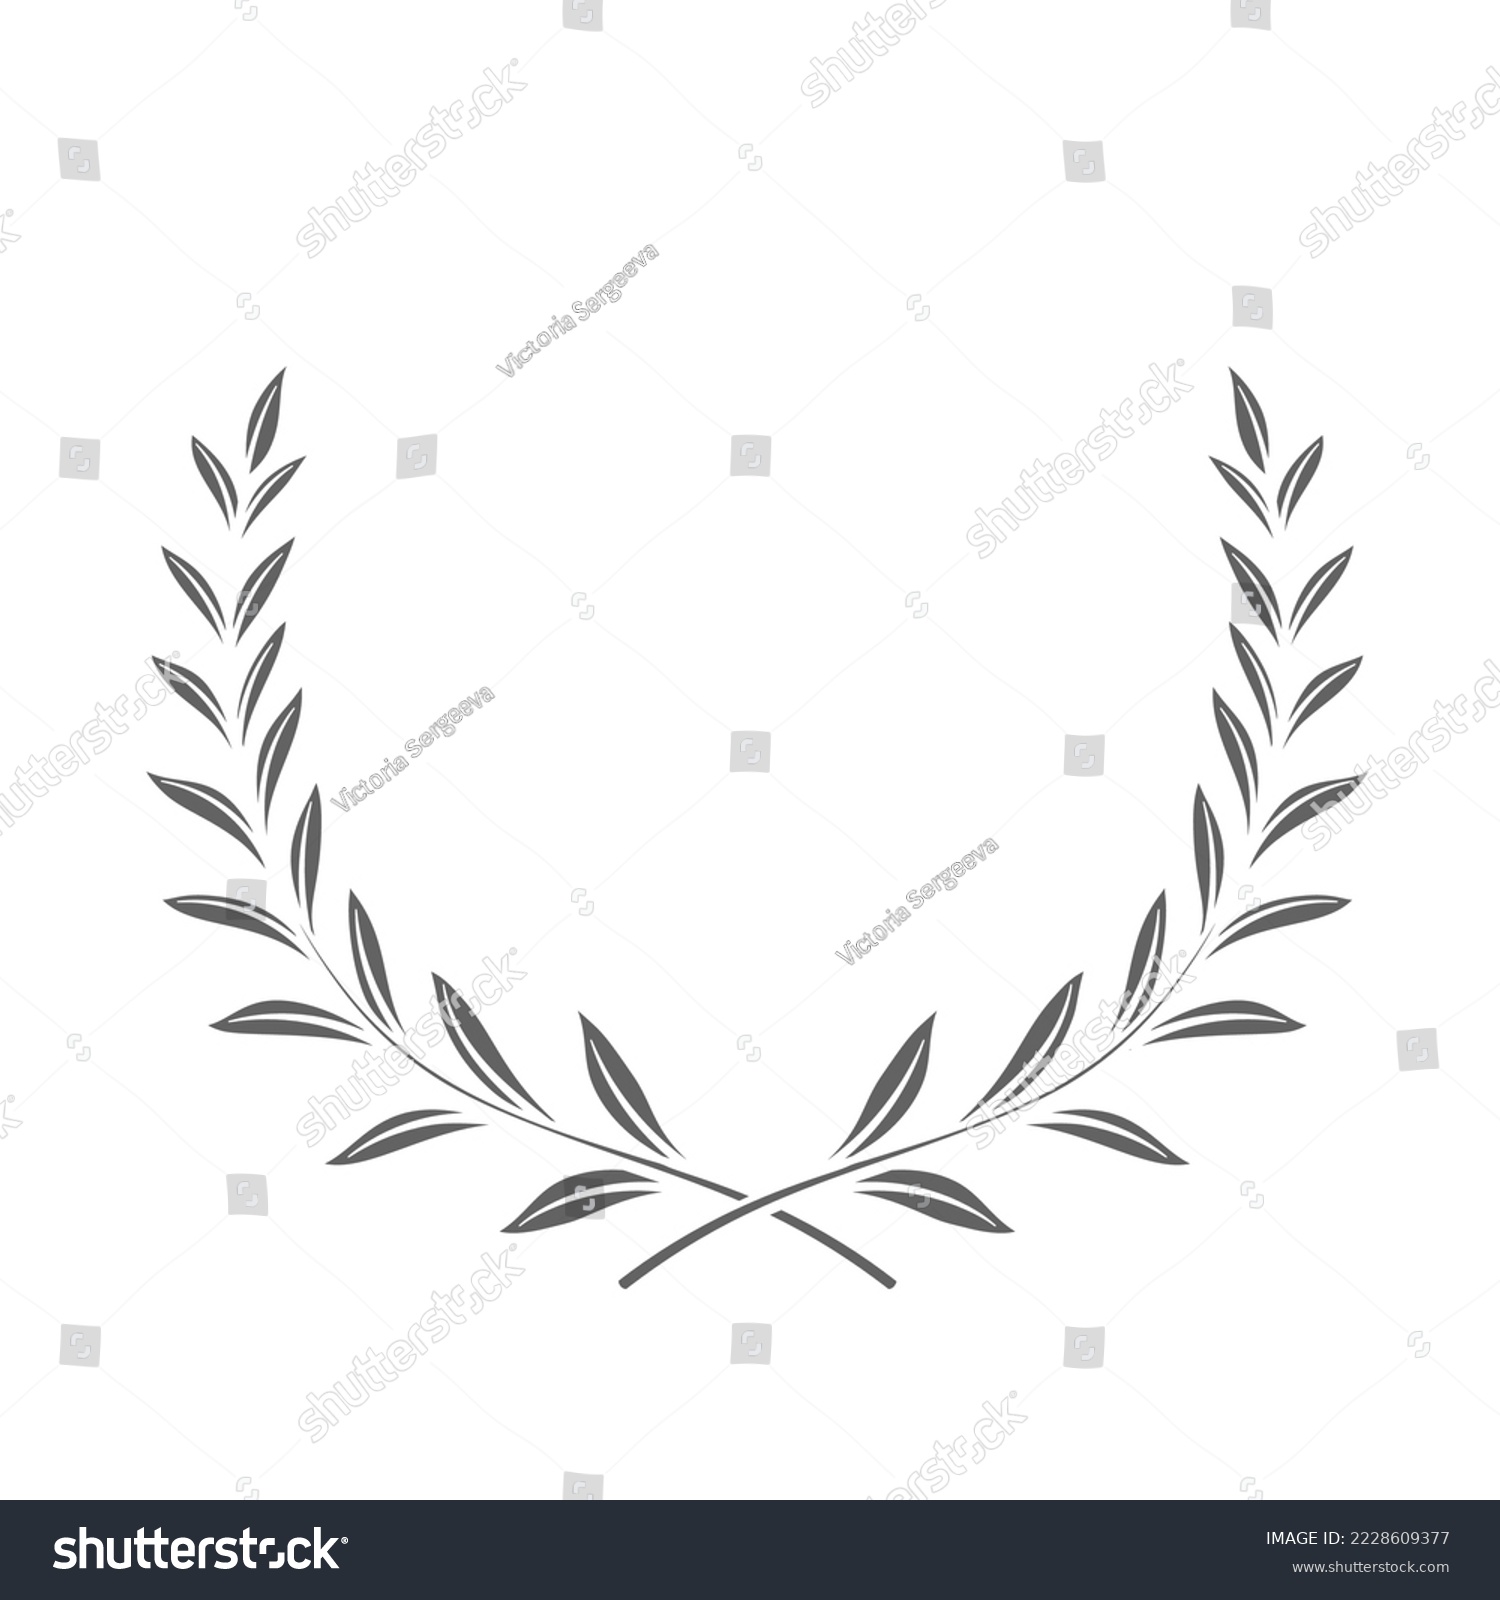 SVG of Award branches of bay leaves glyph icon vector illustration. Silhouette of Greek or Roman laurel wreath for honor winners prize, leaf frame for graduation certificate or sport victory medal award svg